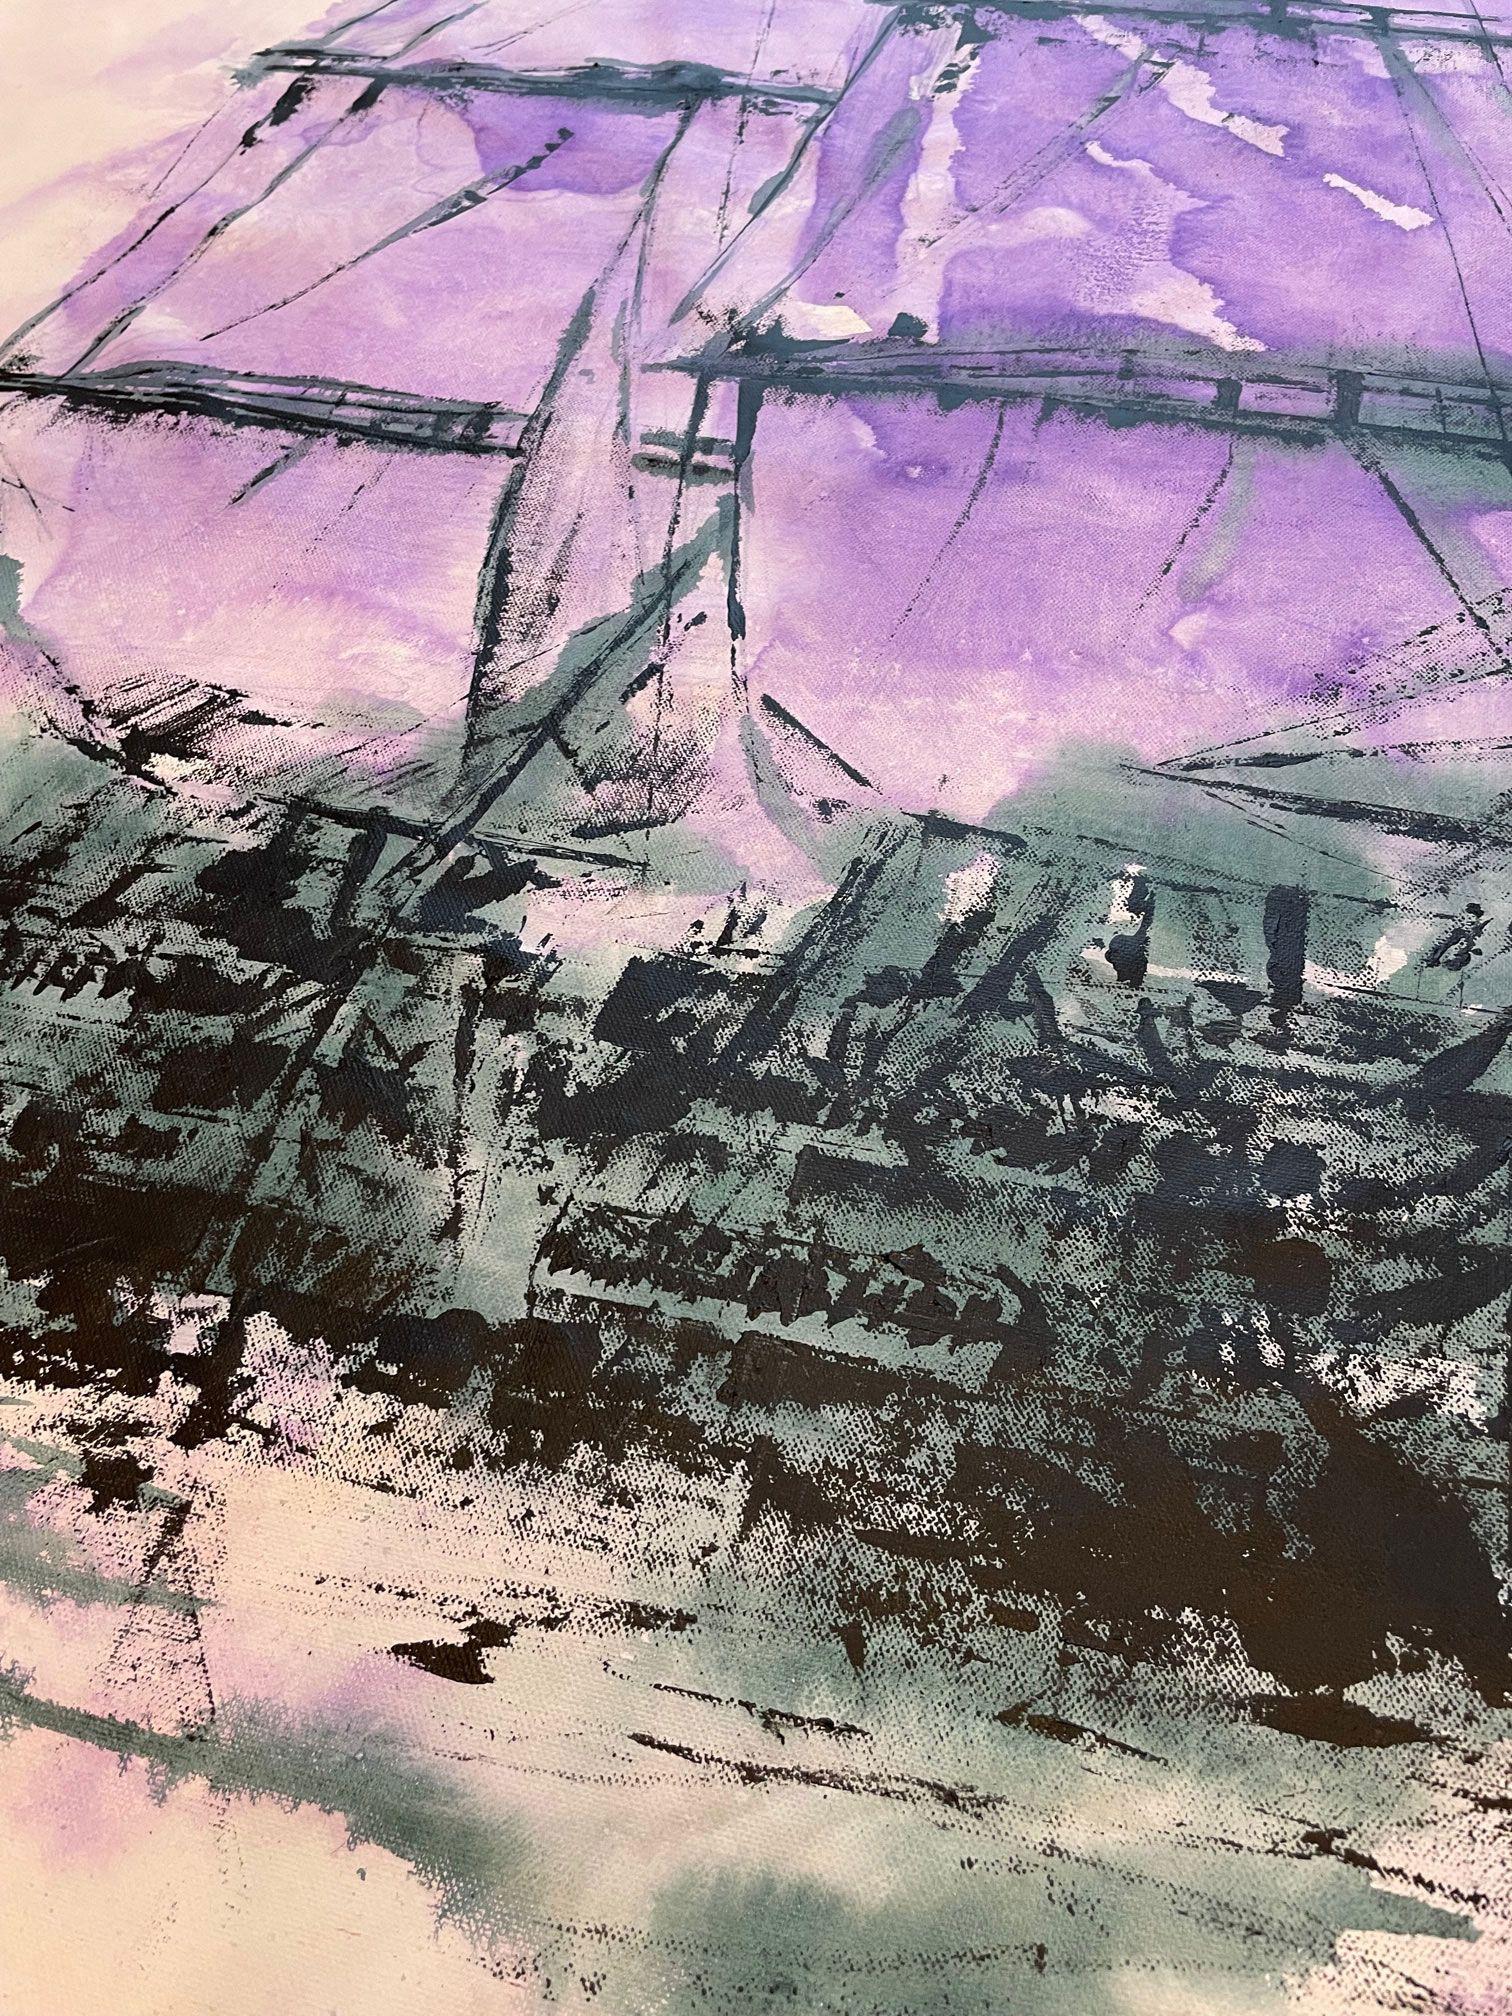 Armada is my modern impressionist take of HMS Victory, HMS Temeraire and HMS Neptune leading either column towards the combined fleet, off Cape Trafalgar, 21st October 1805. The article is painted in green and purple to give a modern feel to the